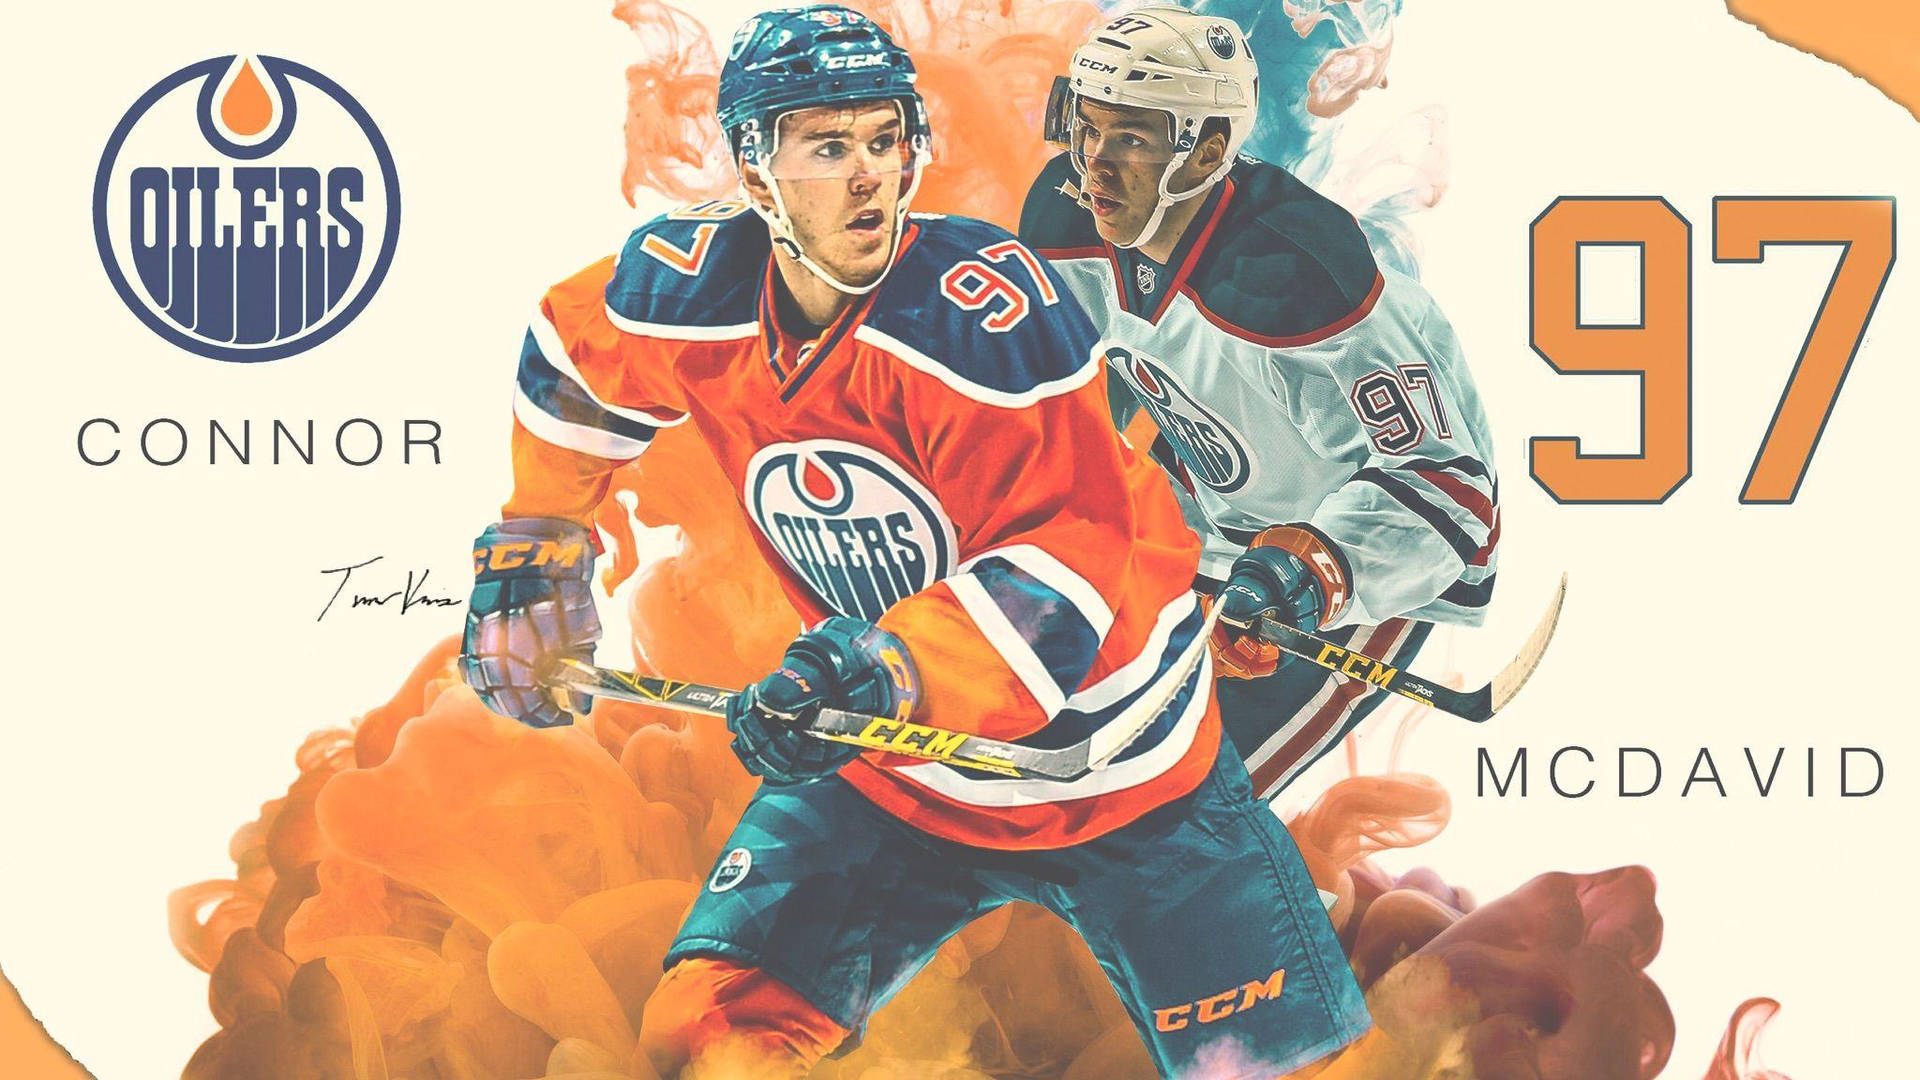 Connor Mcdavid With Oilers Logo Wallpaper